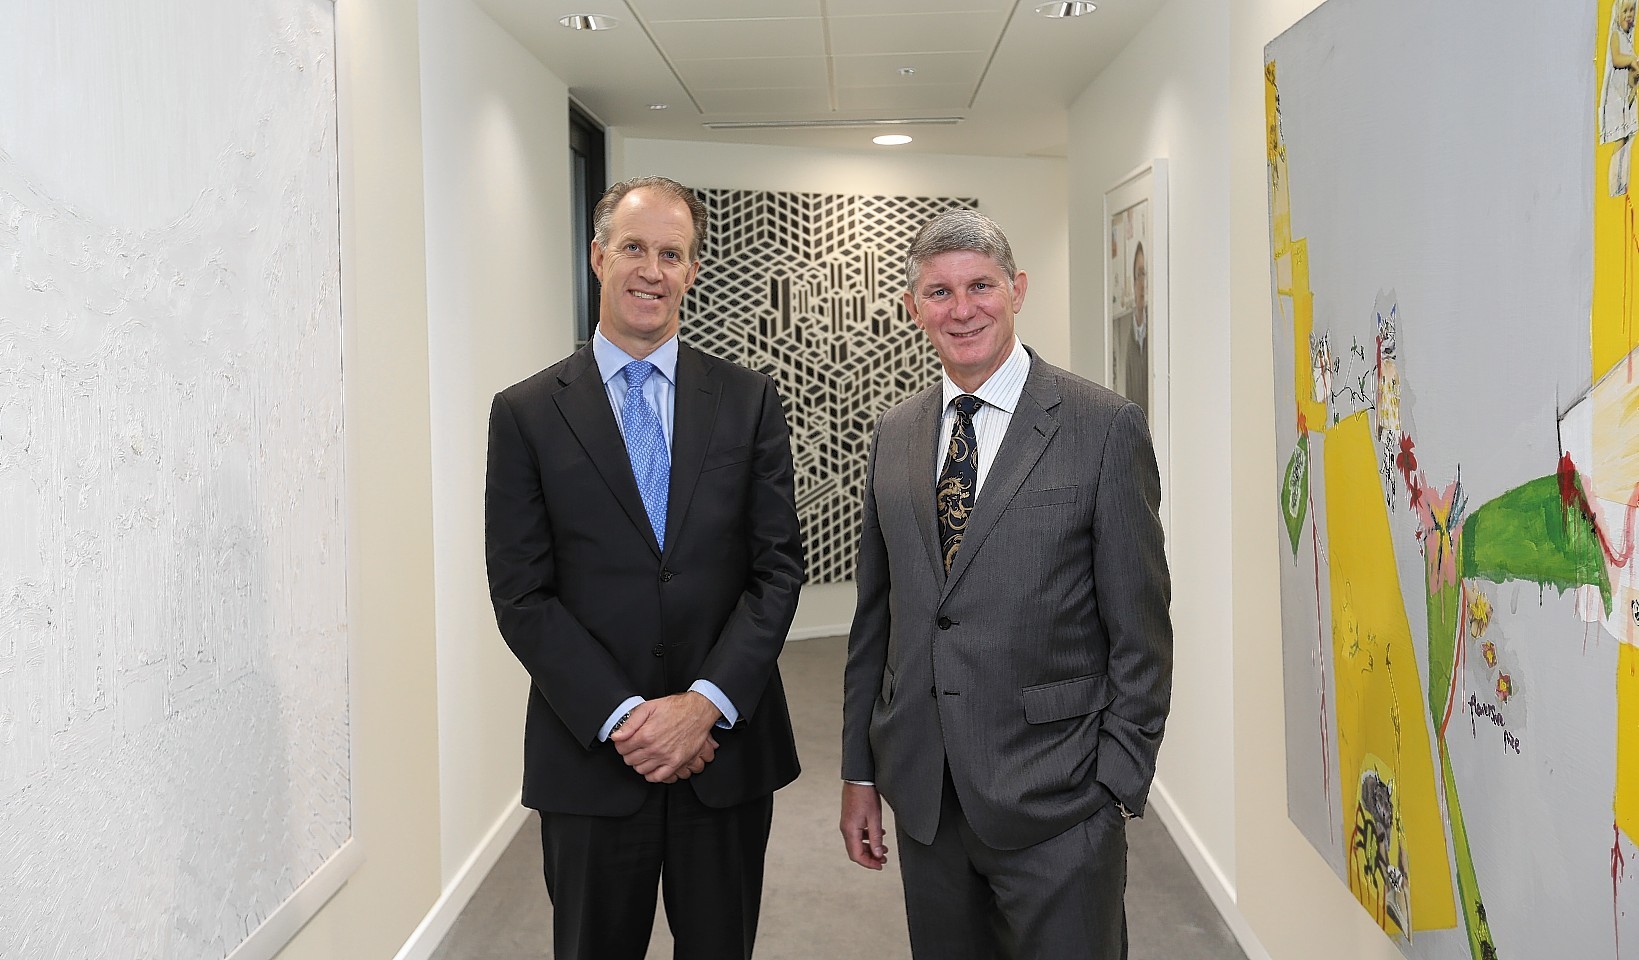 Ruud Zoon, managing director of GDF Suez E&P UK and Rob Buchan, GDF's Aberdeen General Manager